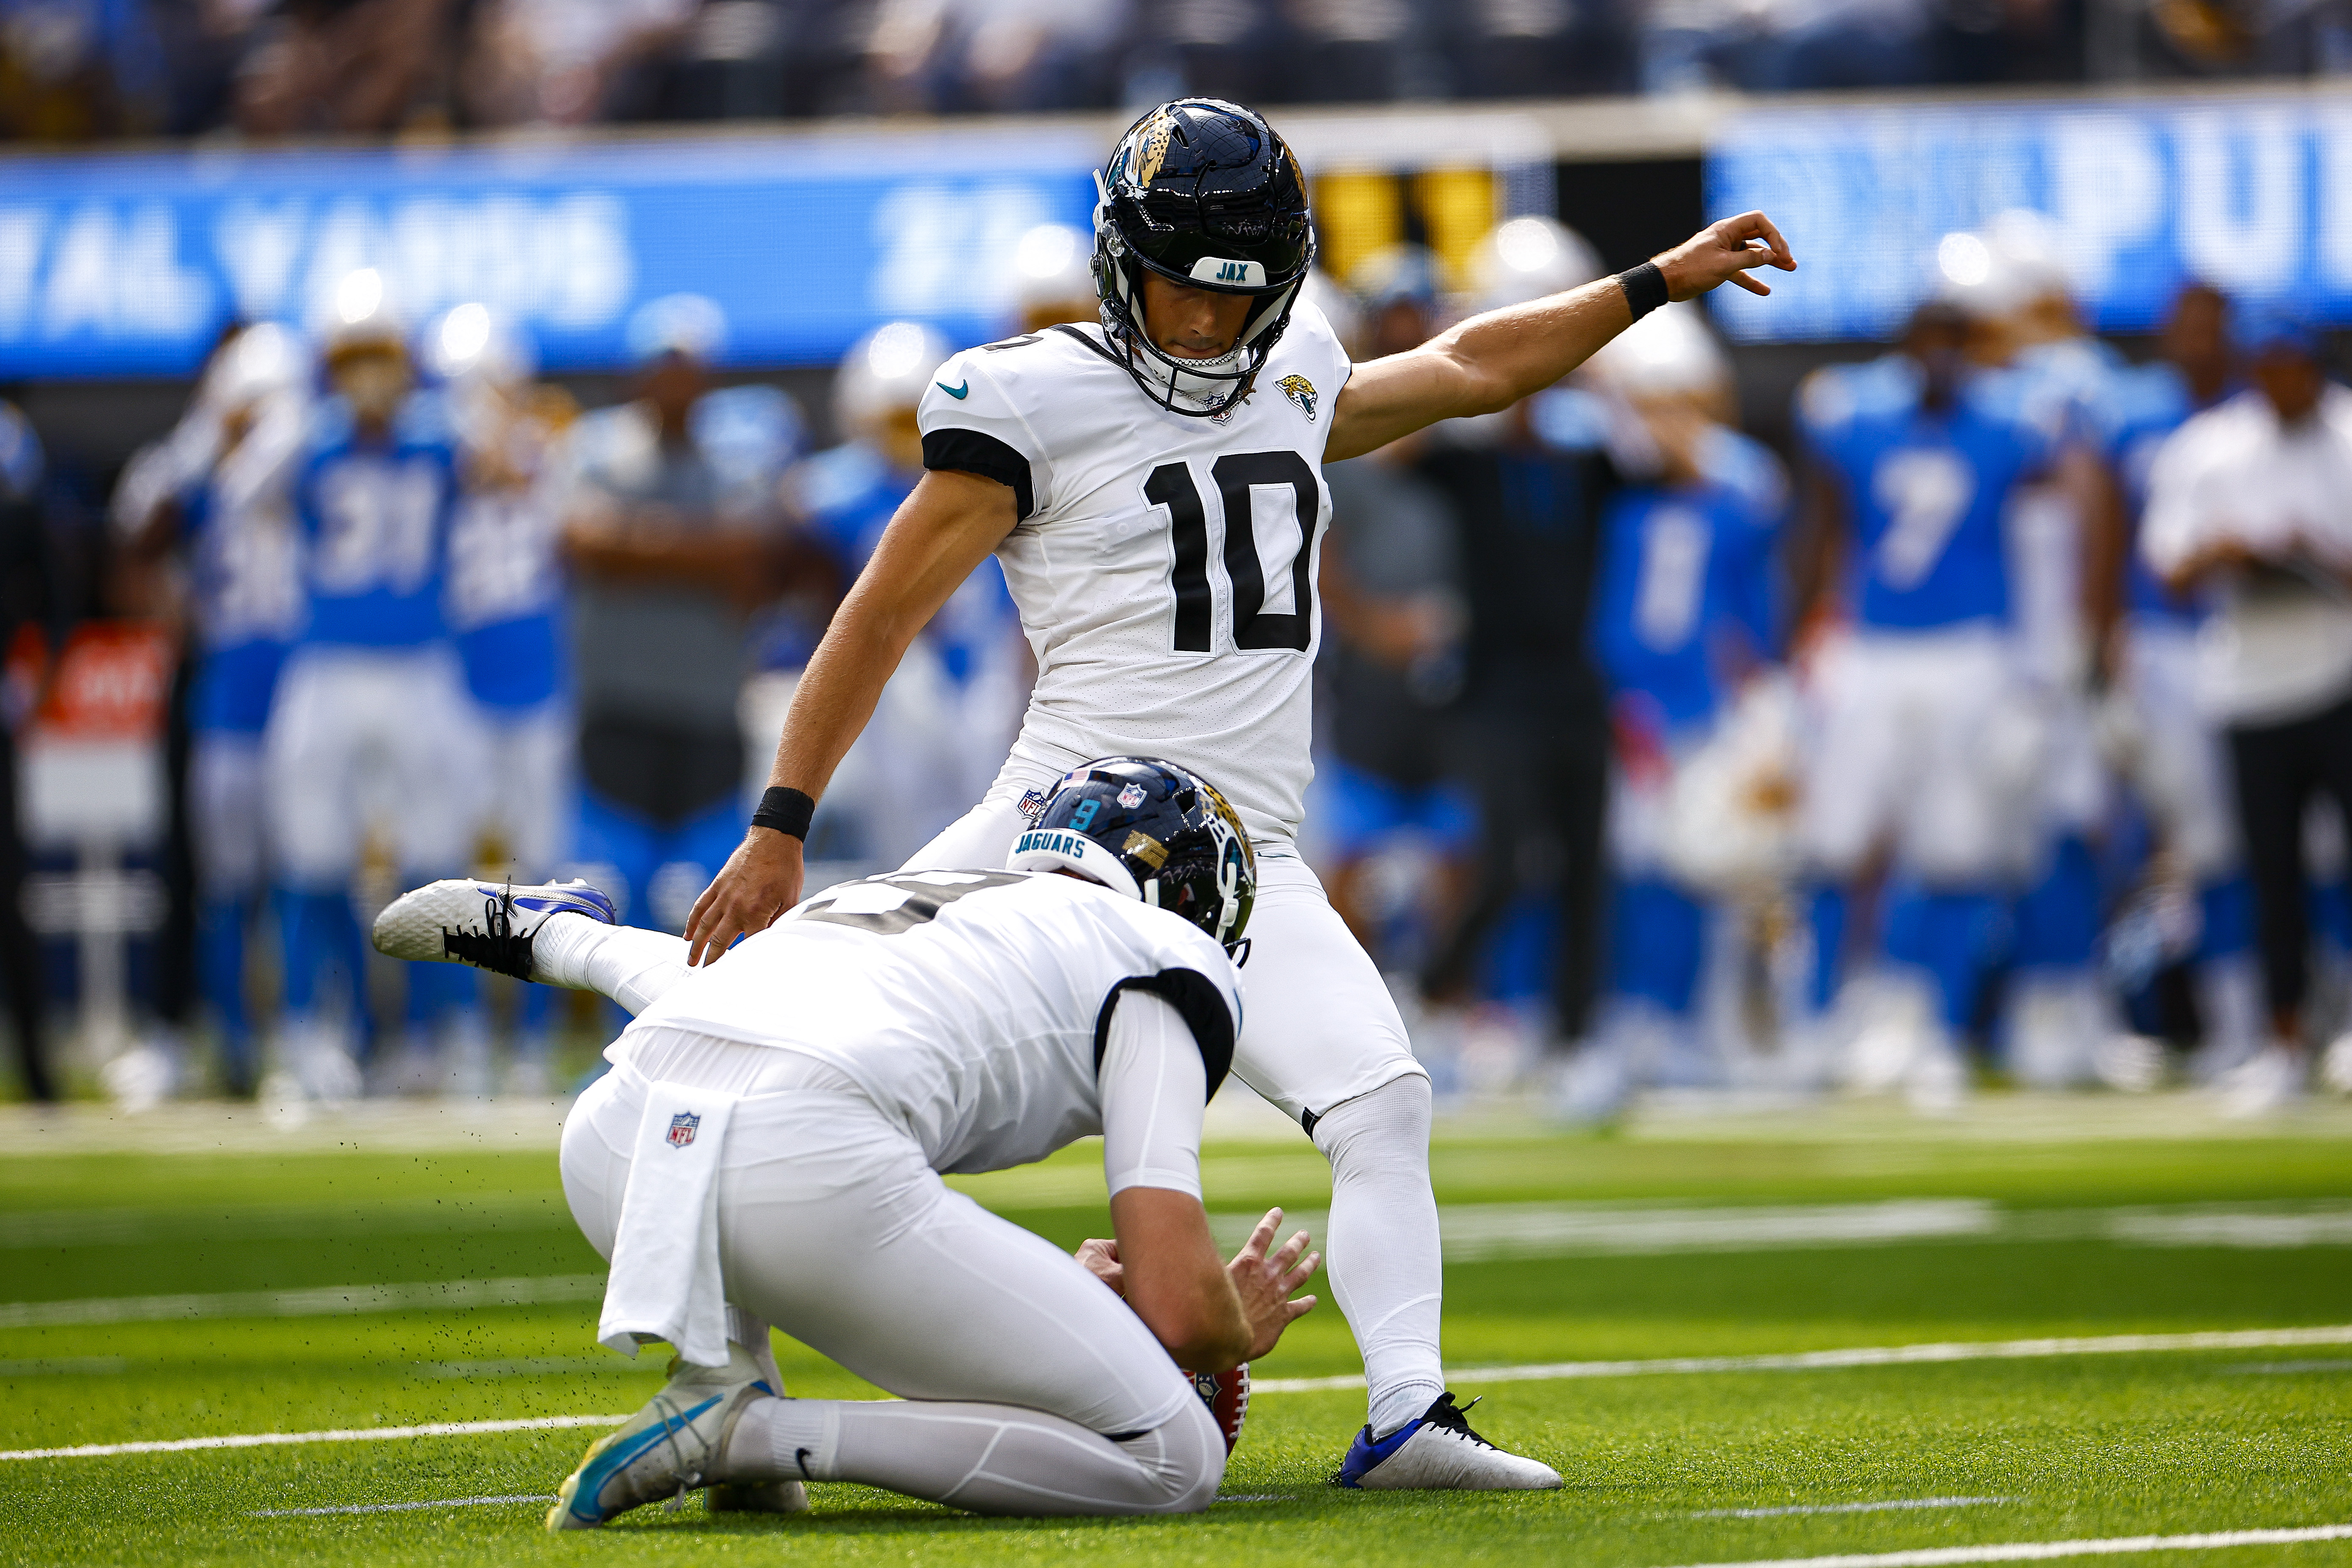 Riley Patterson #10 of the Jacksonville Jaguars kicks a field goal during the second quarter against the Los Angeles Chargers at SoFi Stadium on September 25, 2022 in Inglewood, California.